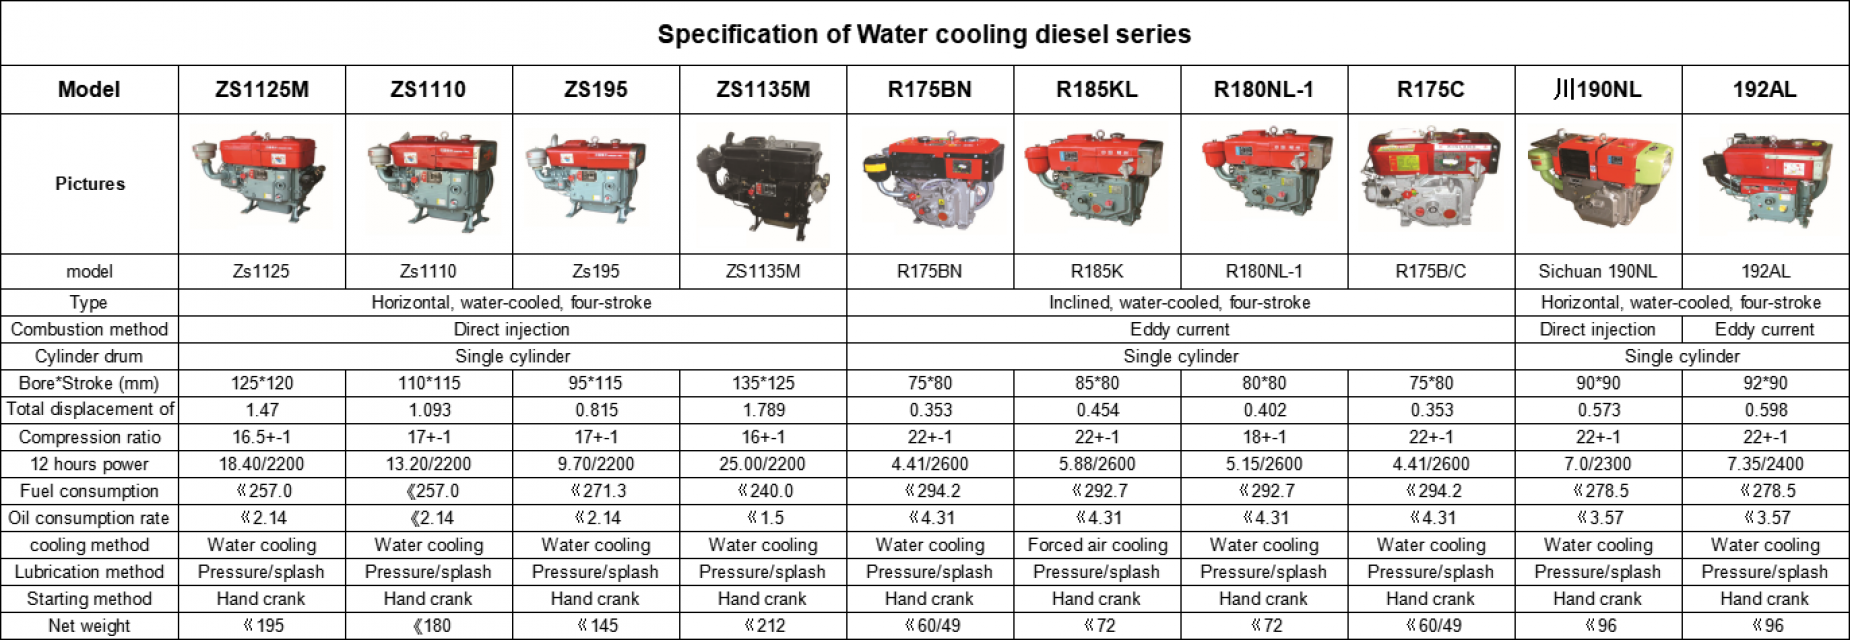 Water cooling diesel series With CE and EPA approved